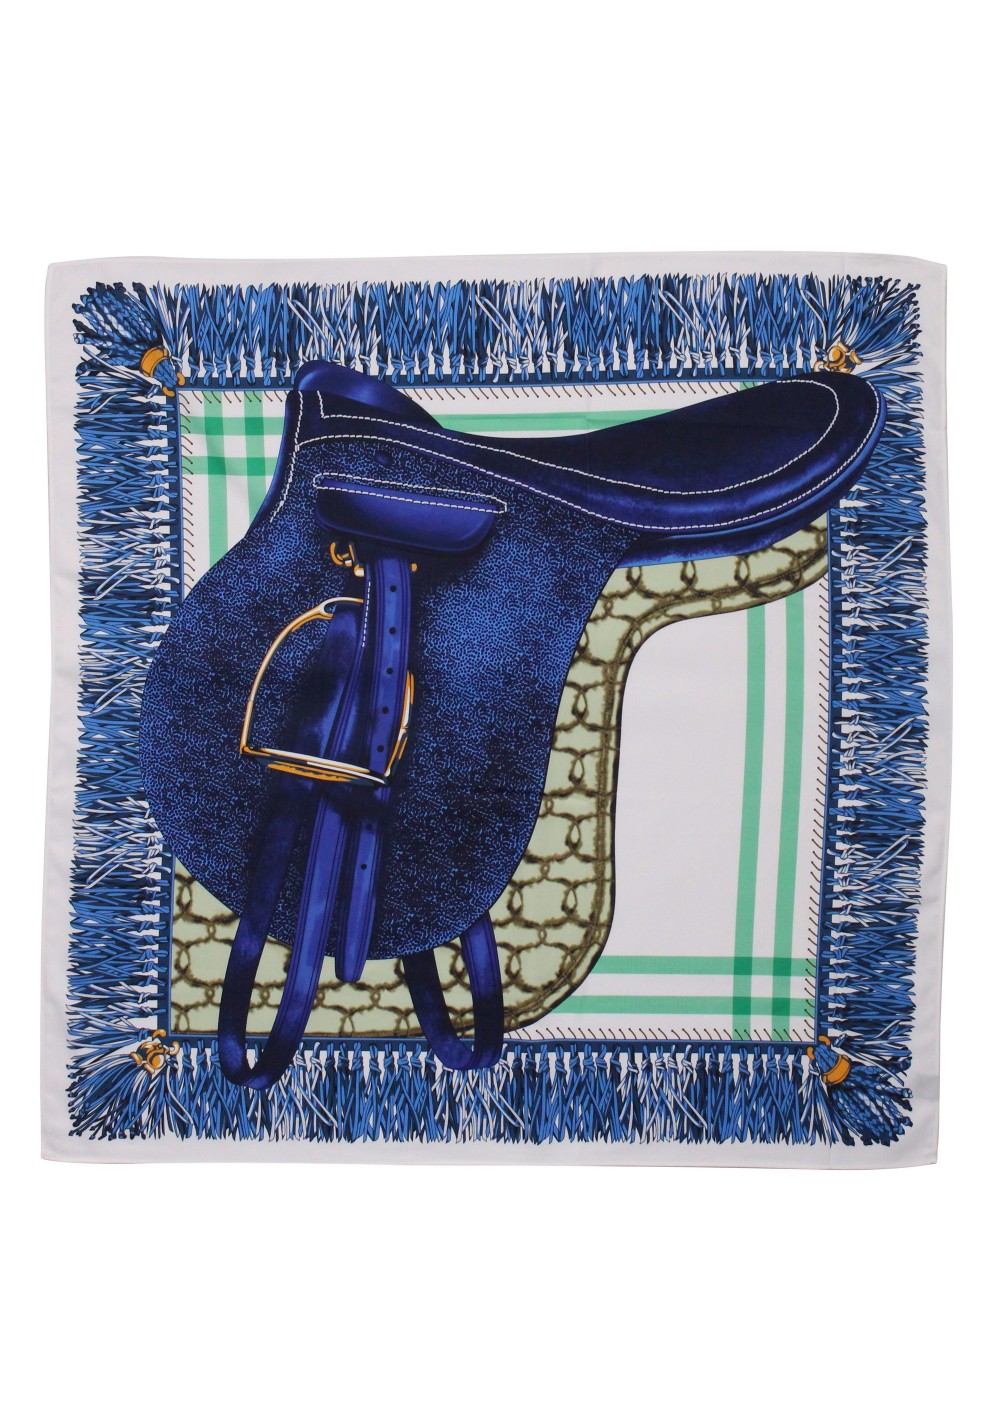 English Riding Saddle Scarf in Navy, Green, and Cream